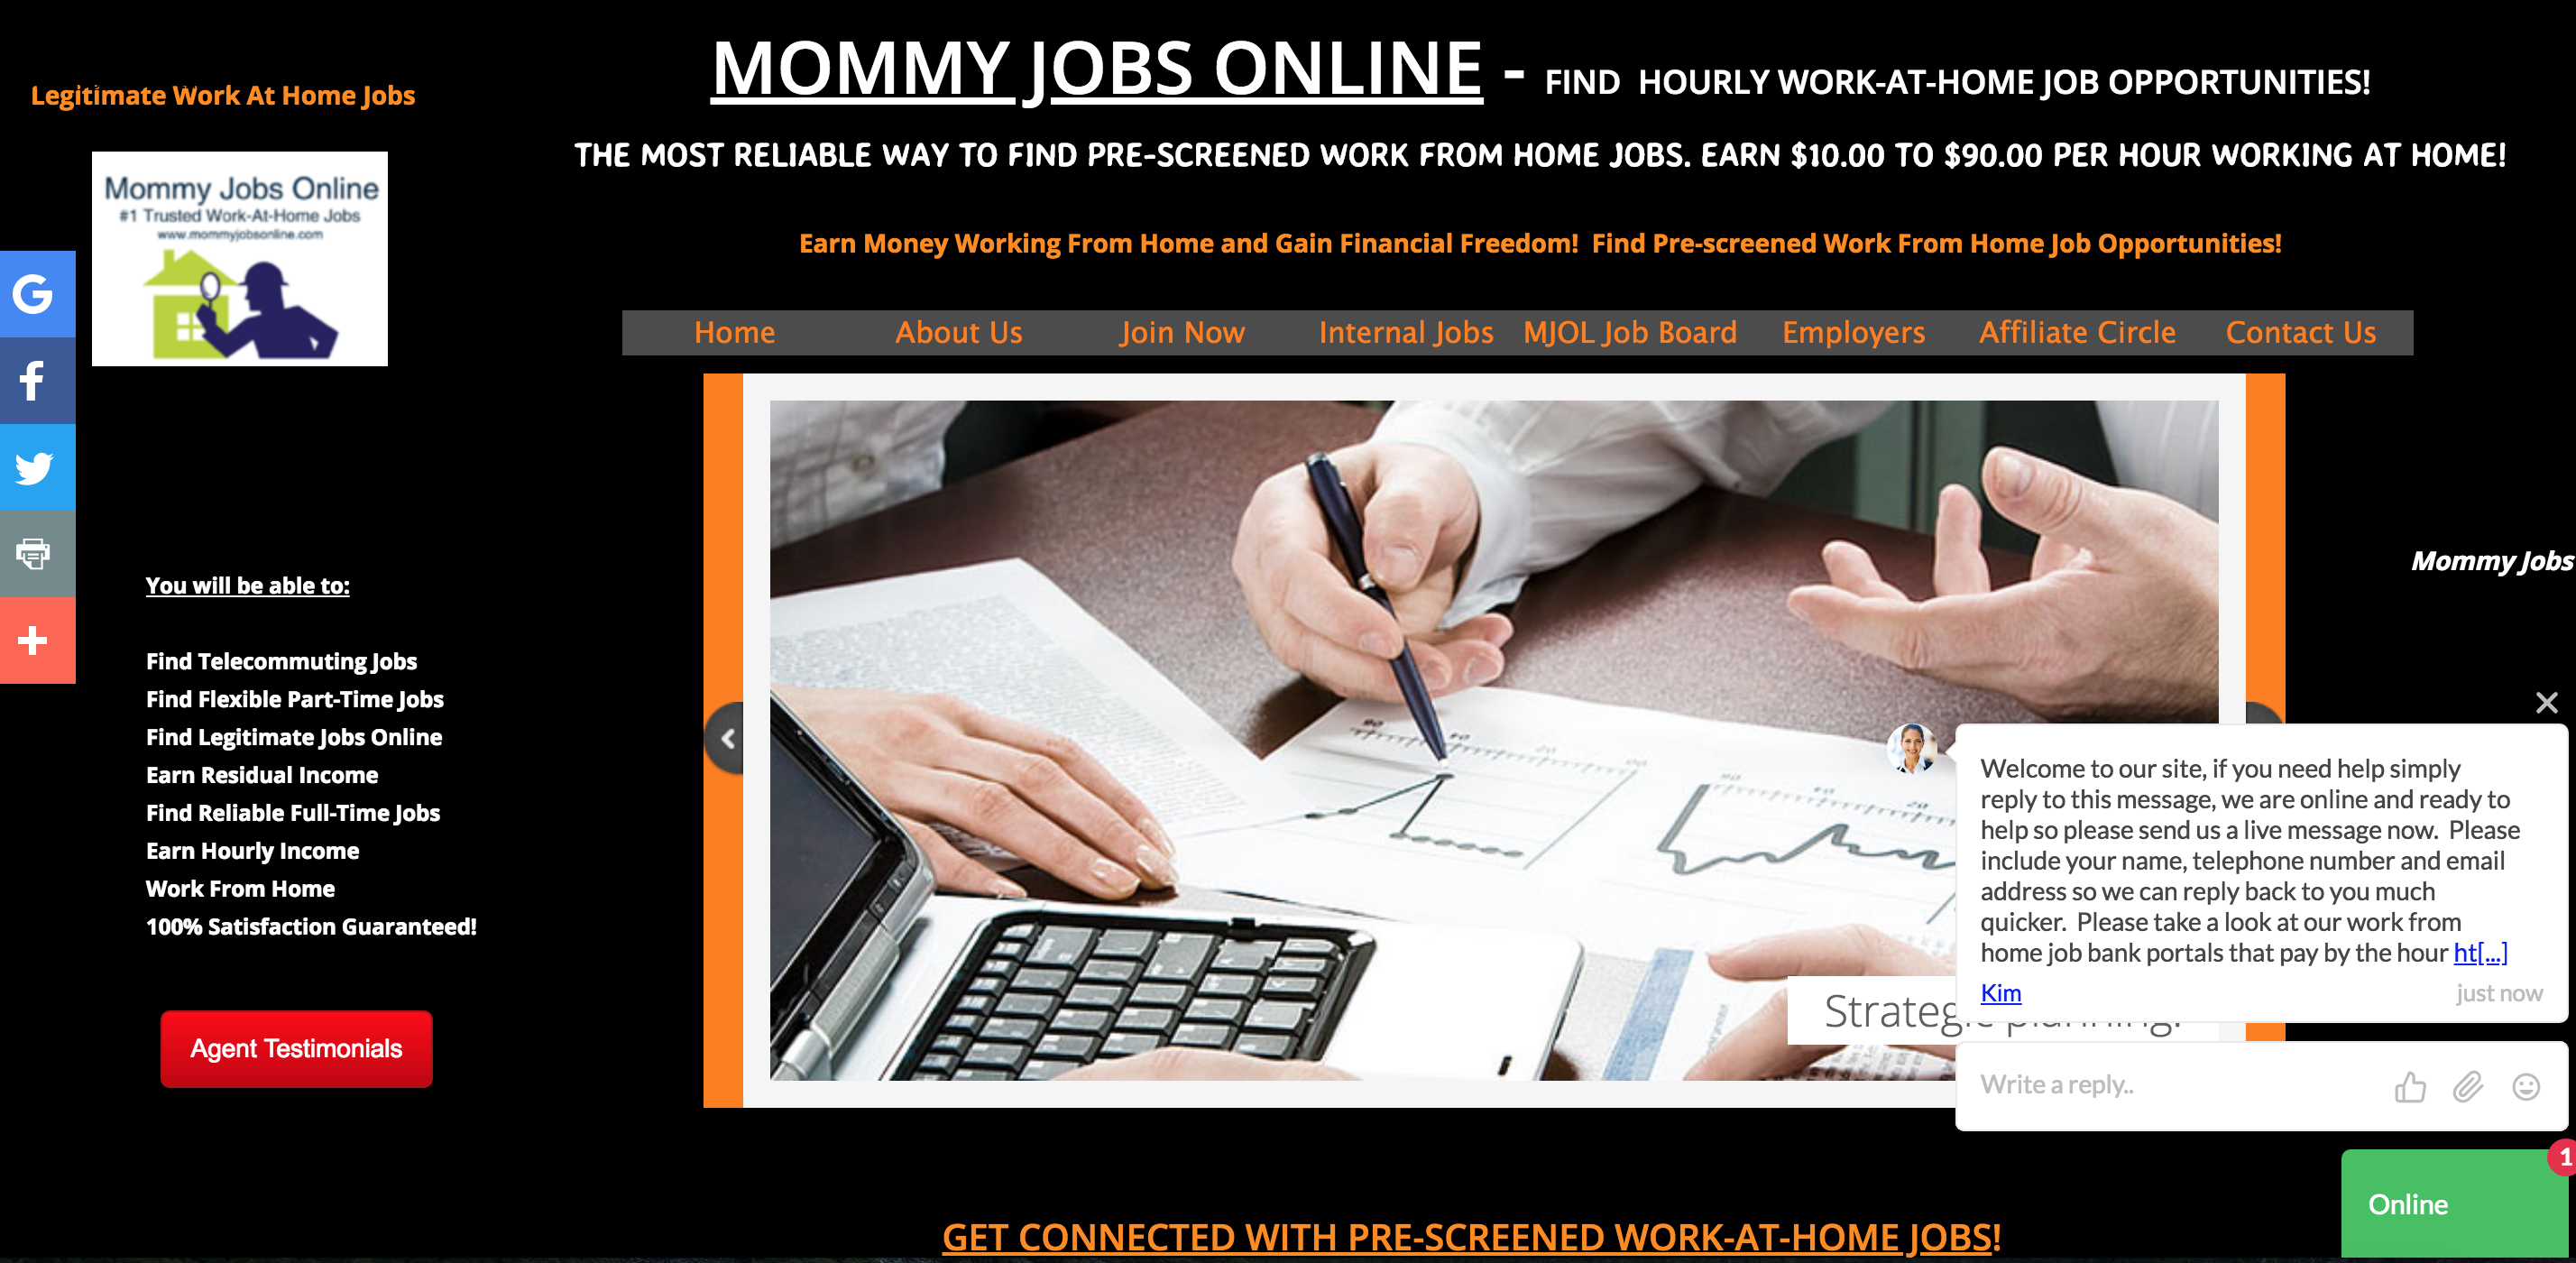 Mommy Jobs Online Review Scam